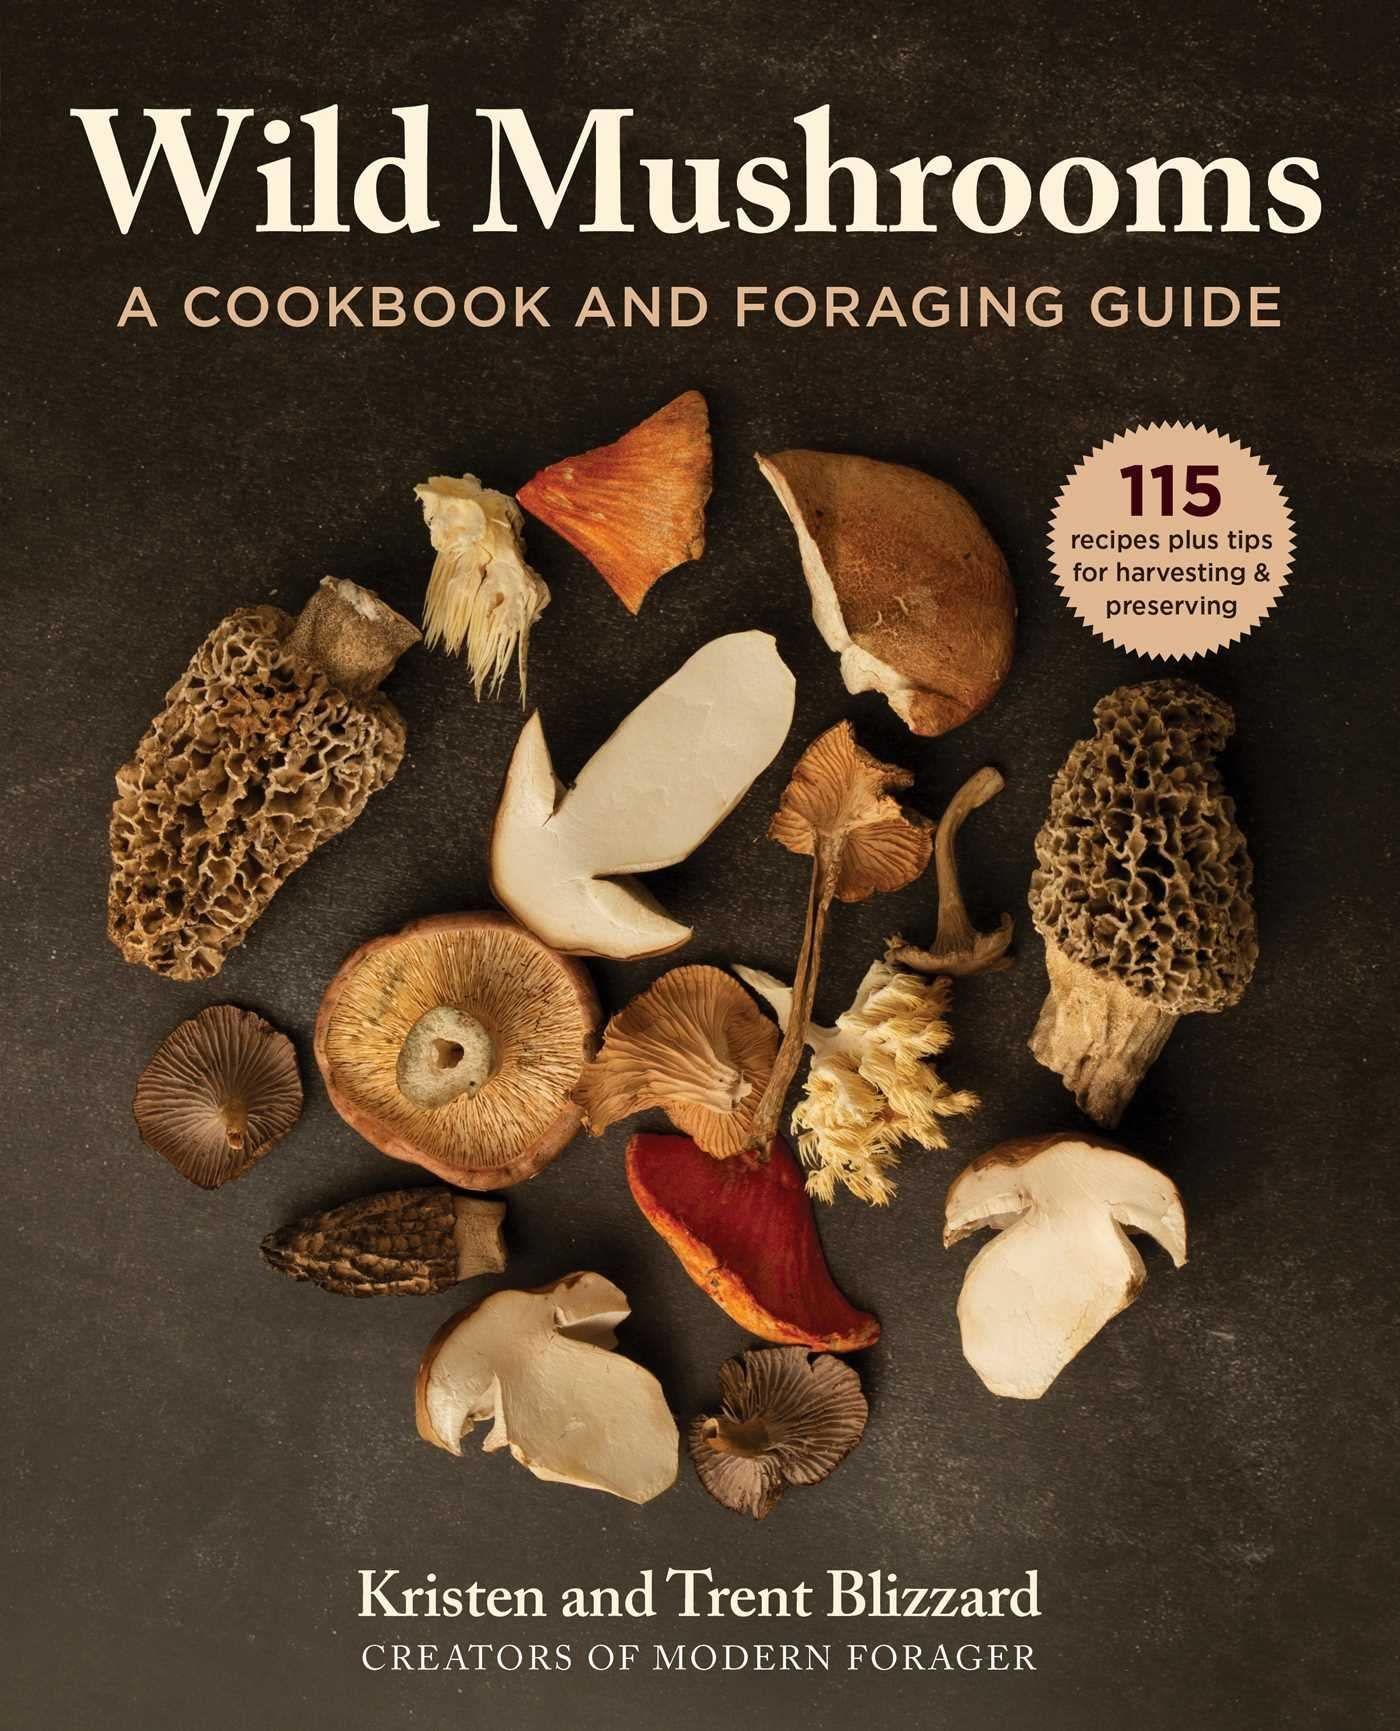 Wild Mushrooms: A Cookbook and Foraging Guide book cover